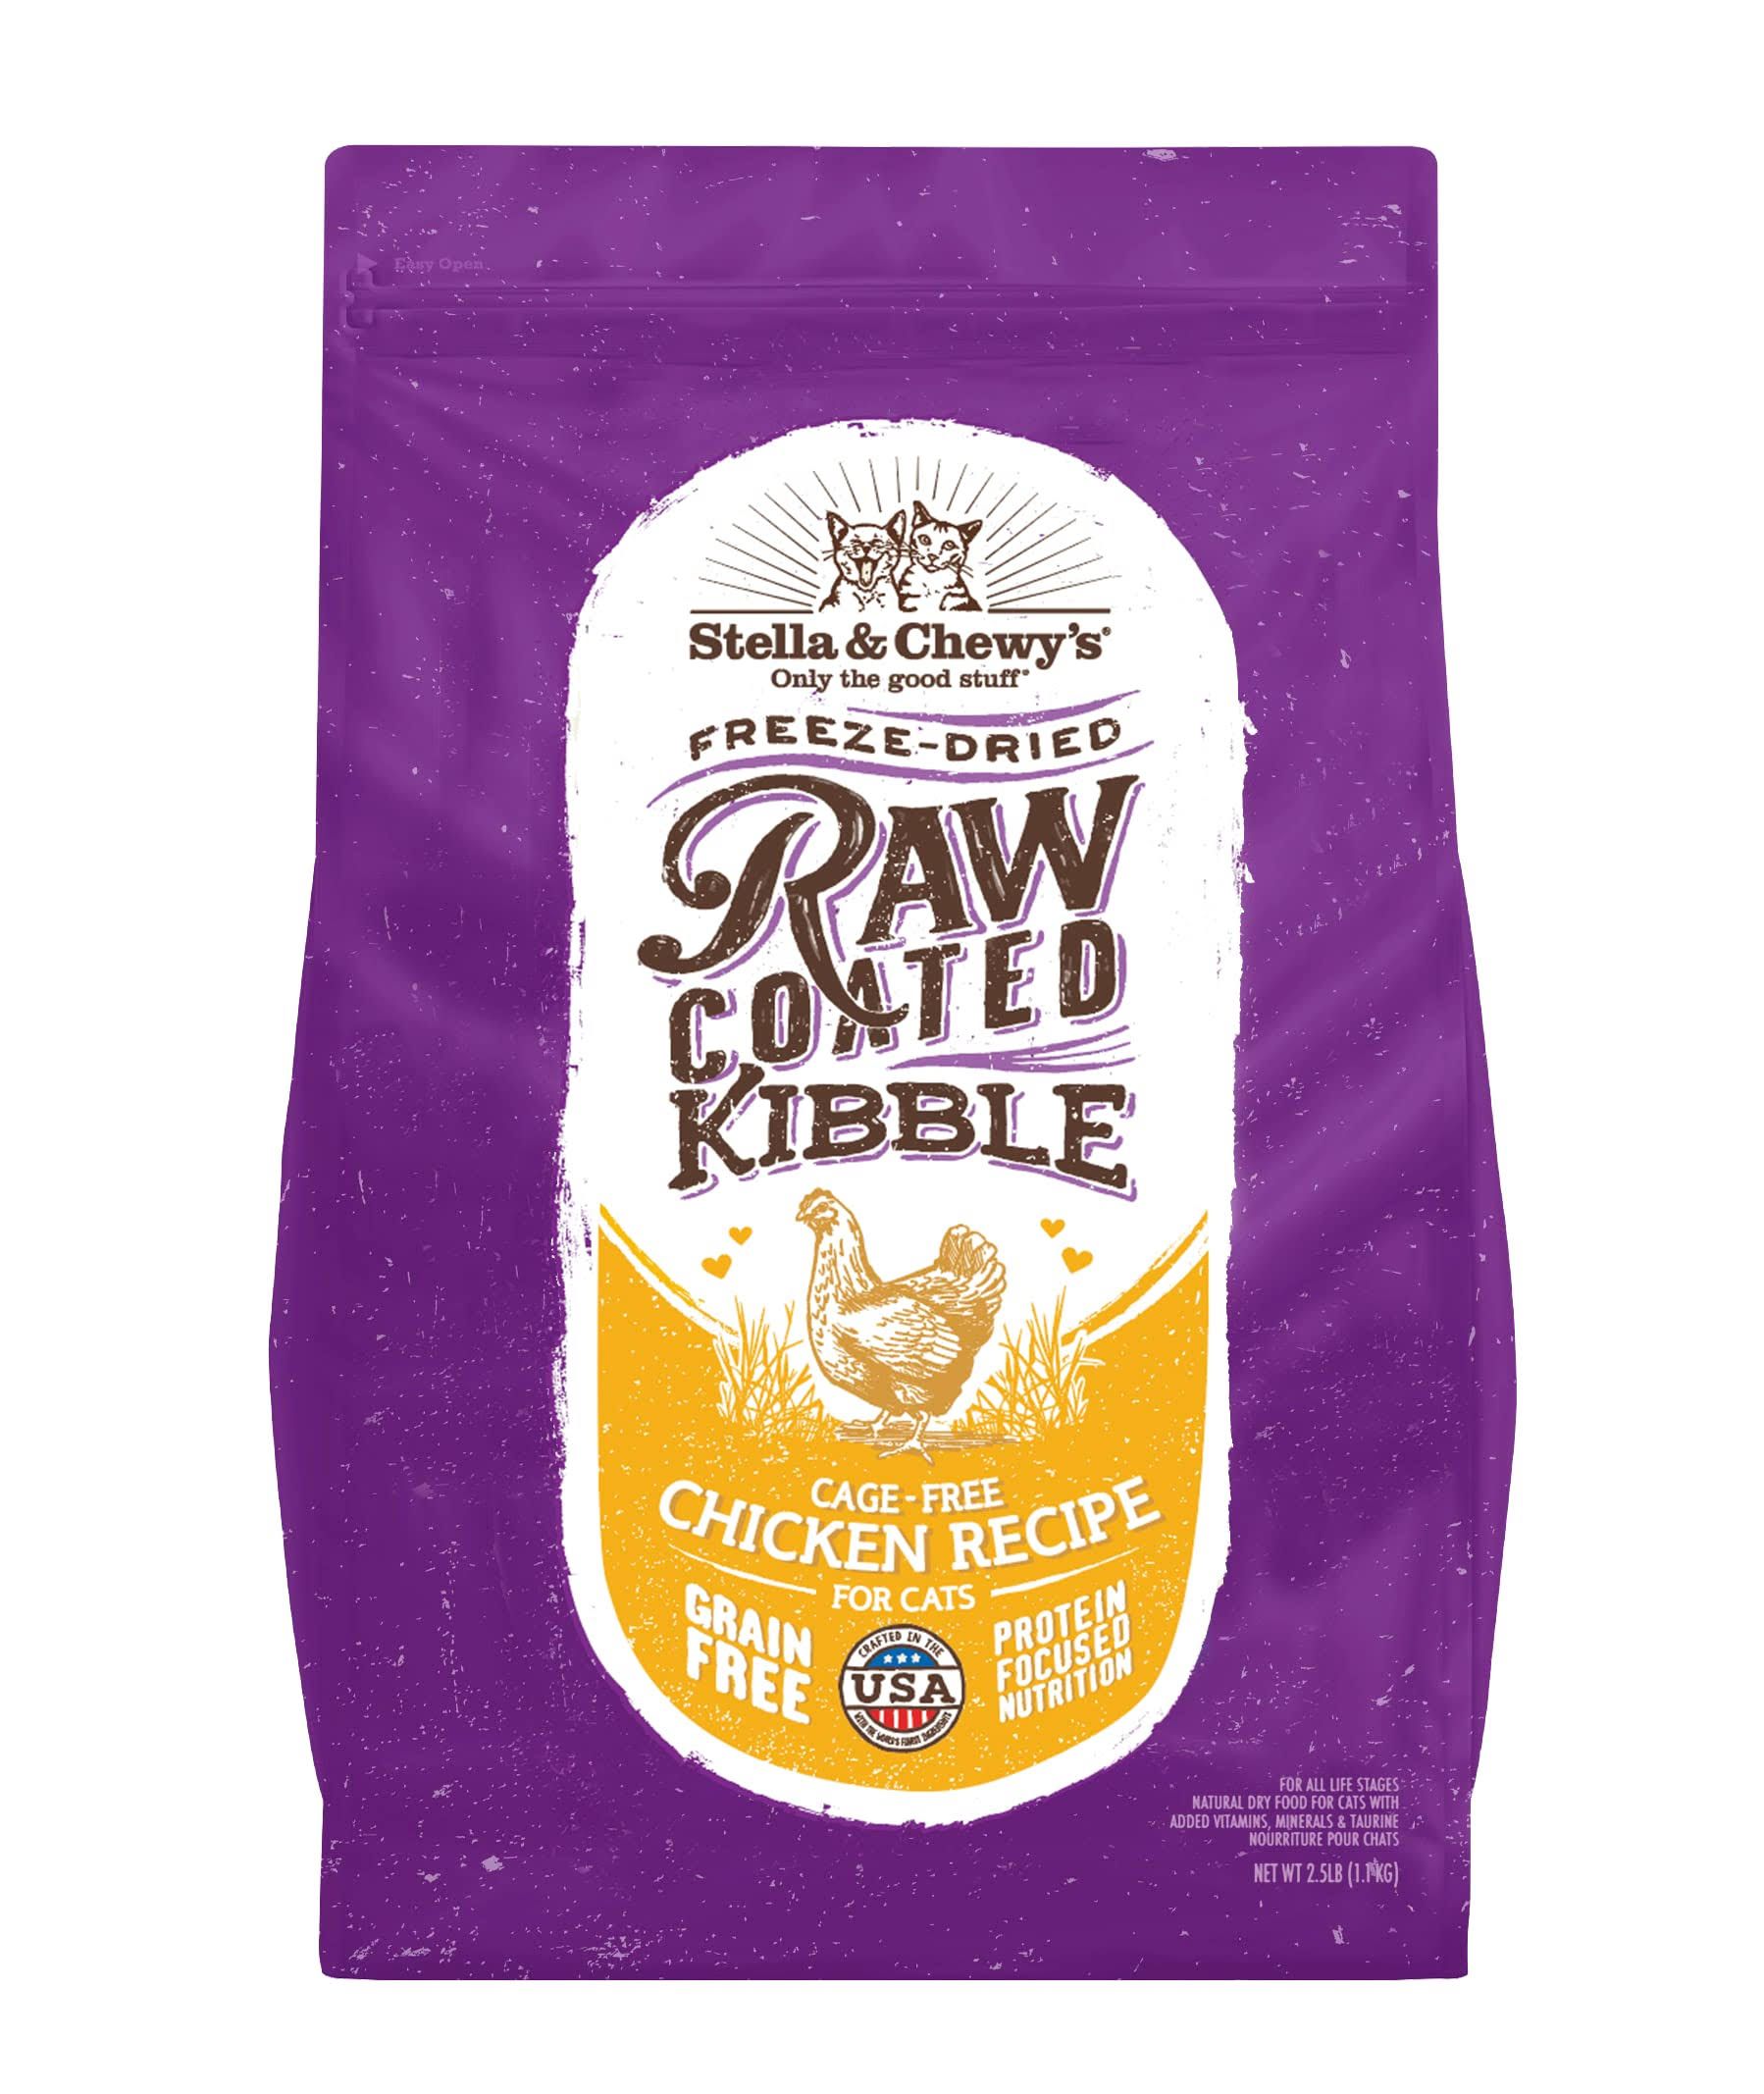 Stella & Chewy's Raw Coated Kibble Cage-Free Chicken Recipe Cat Food 2.5 lbs